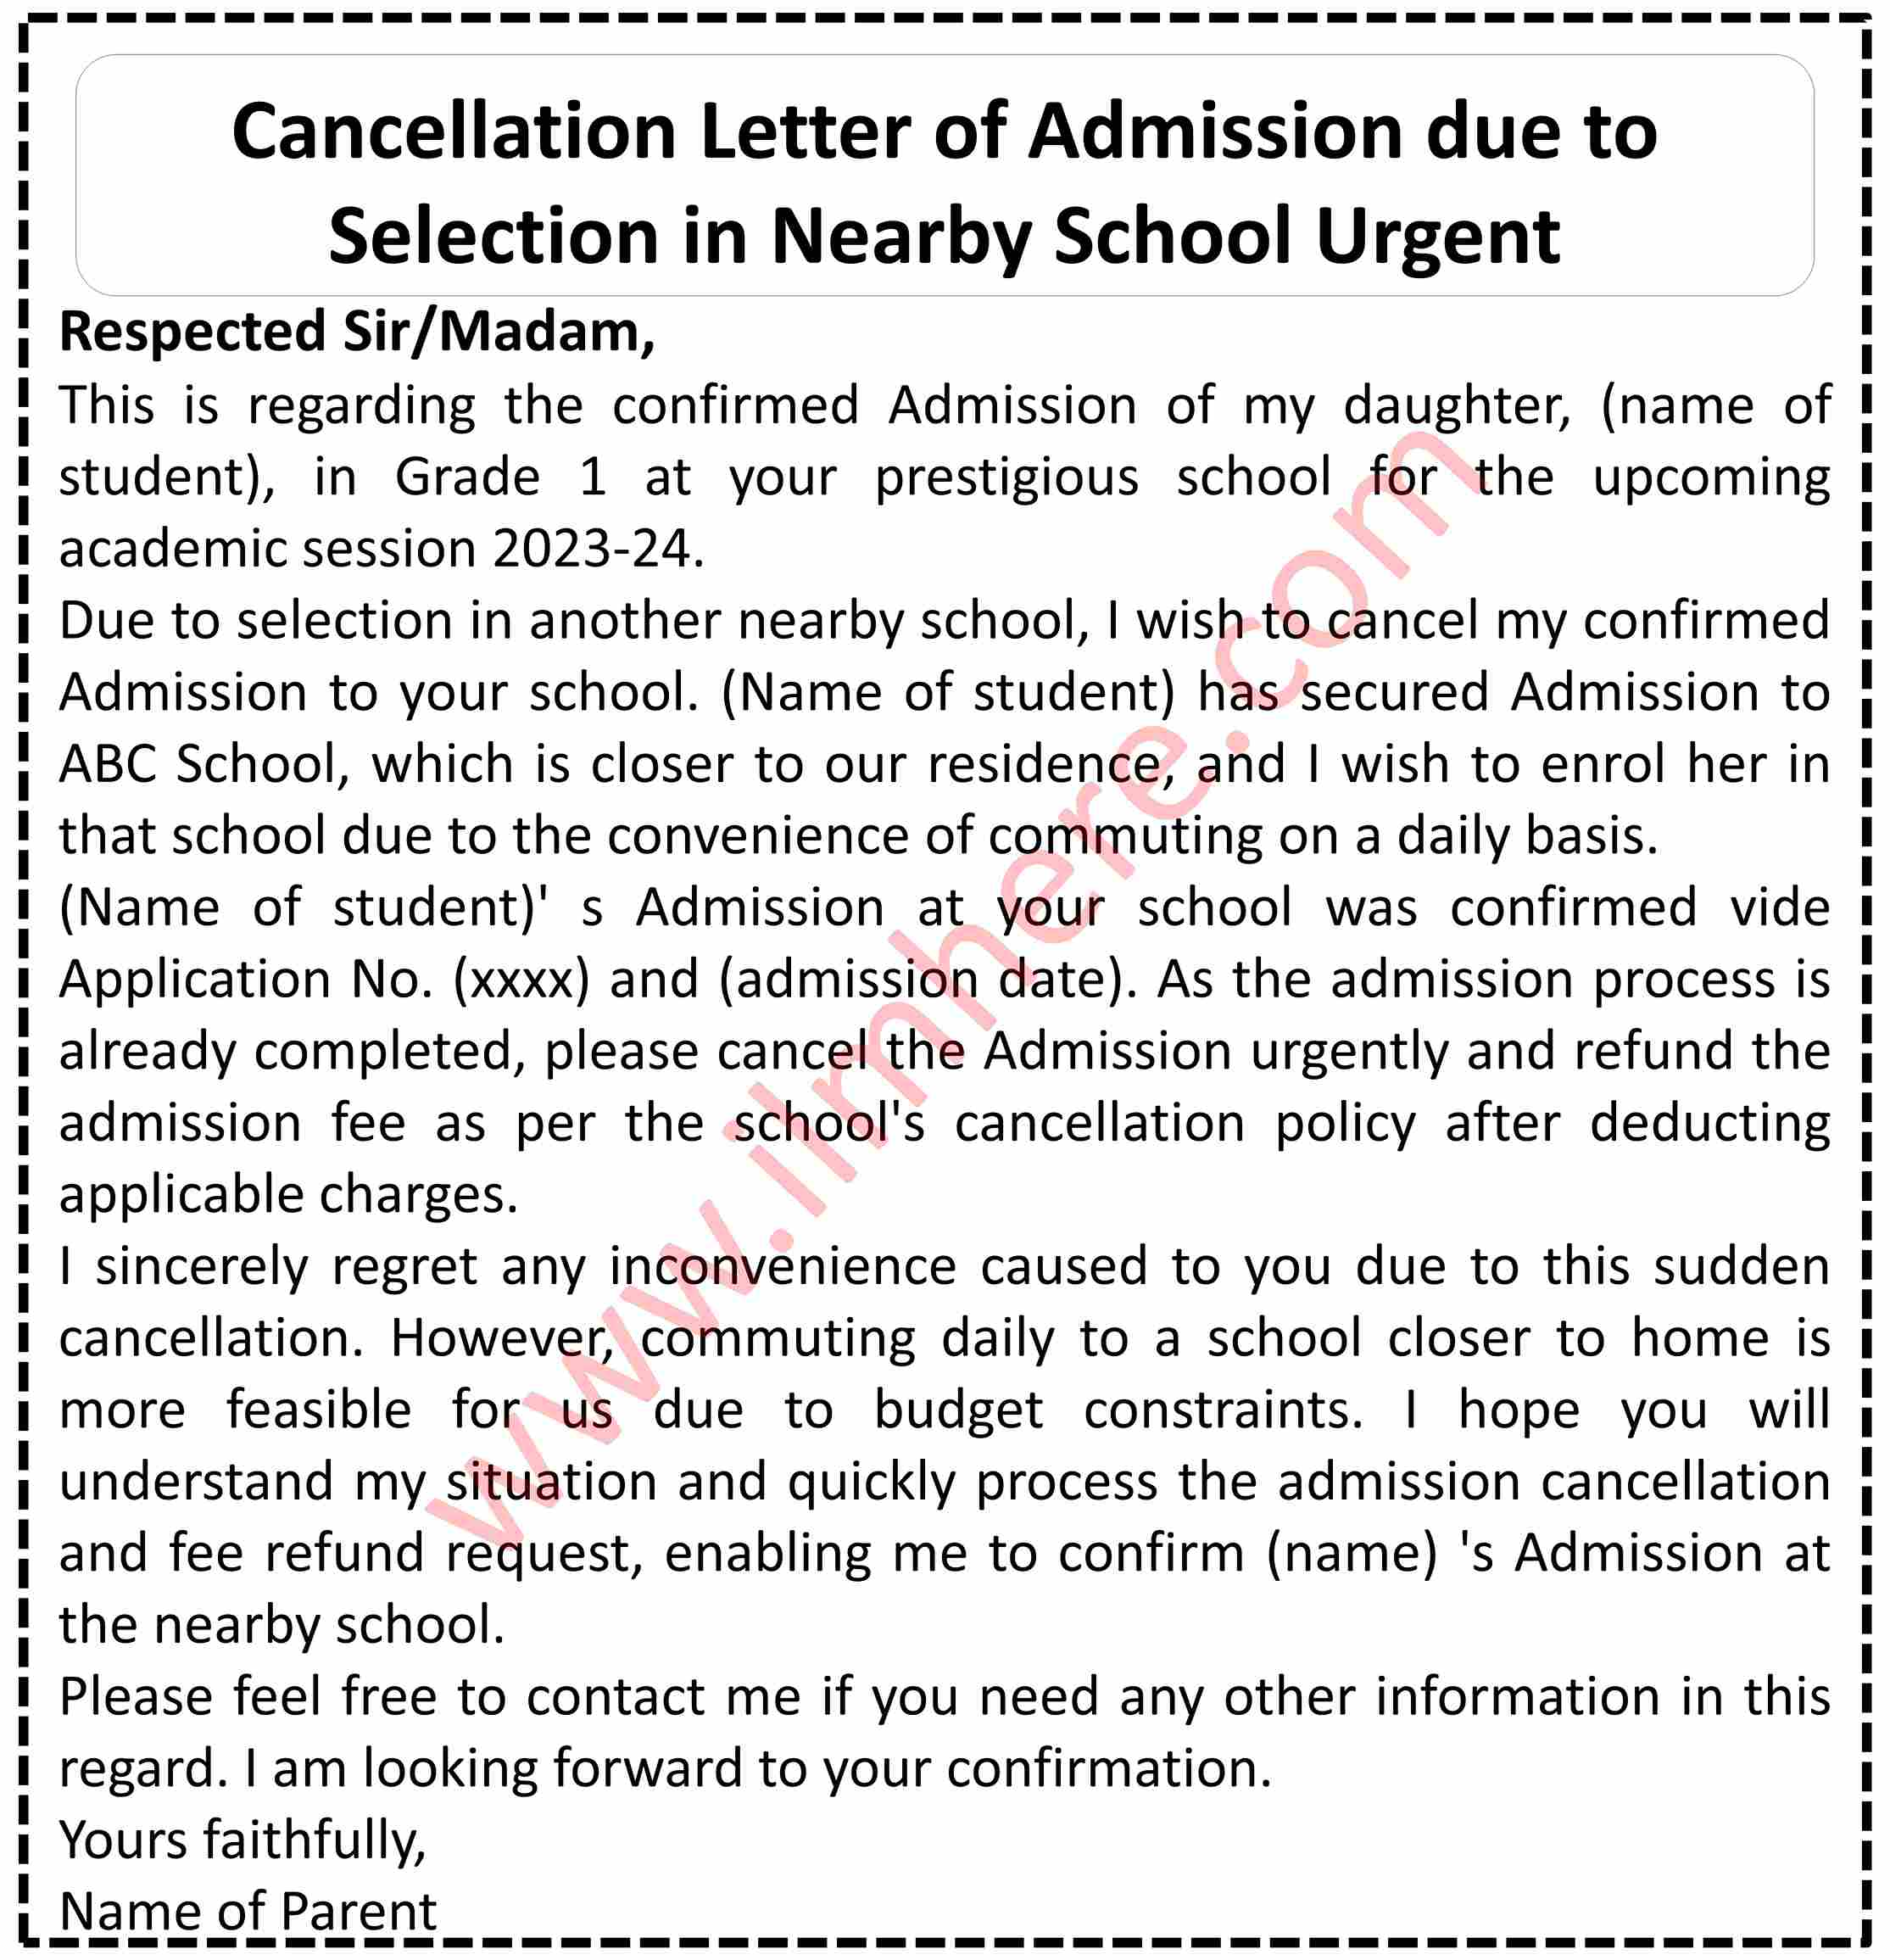 Cancellation Letter of Admission due to Selection in Nearby School Urgent